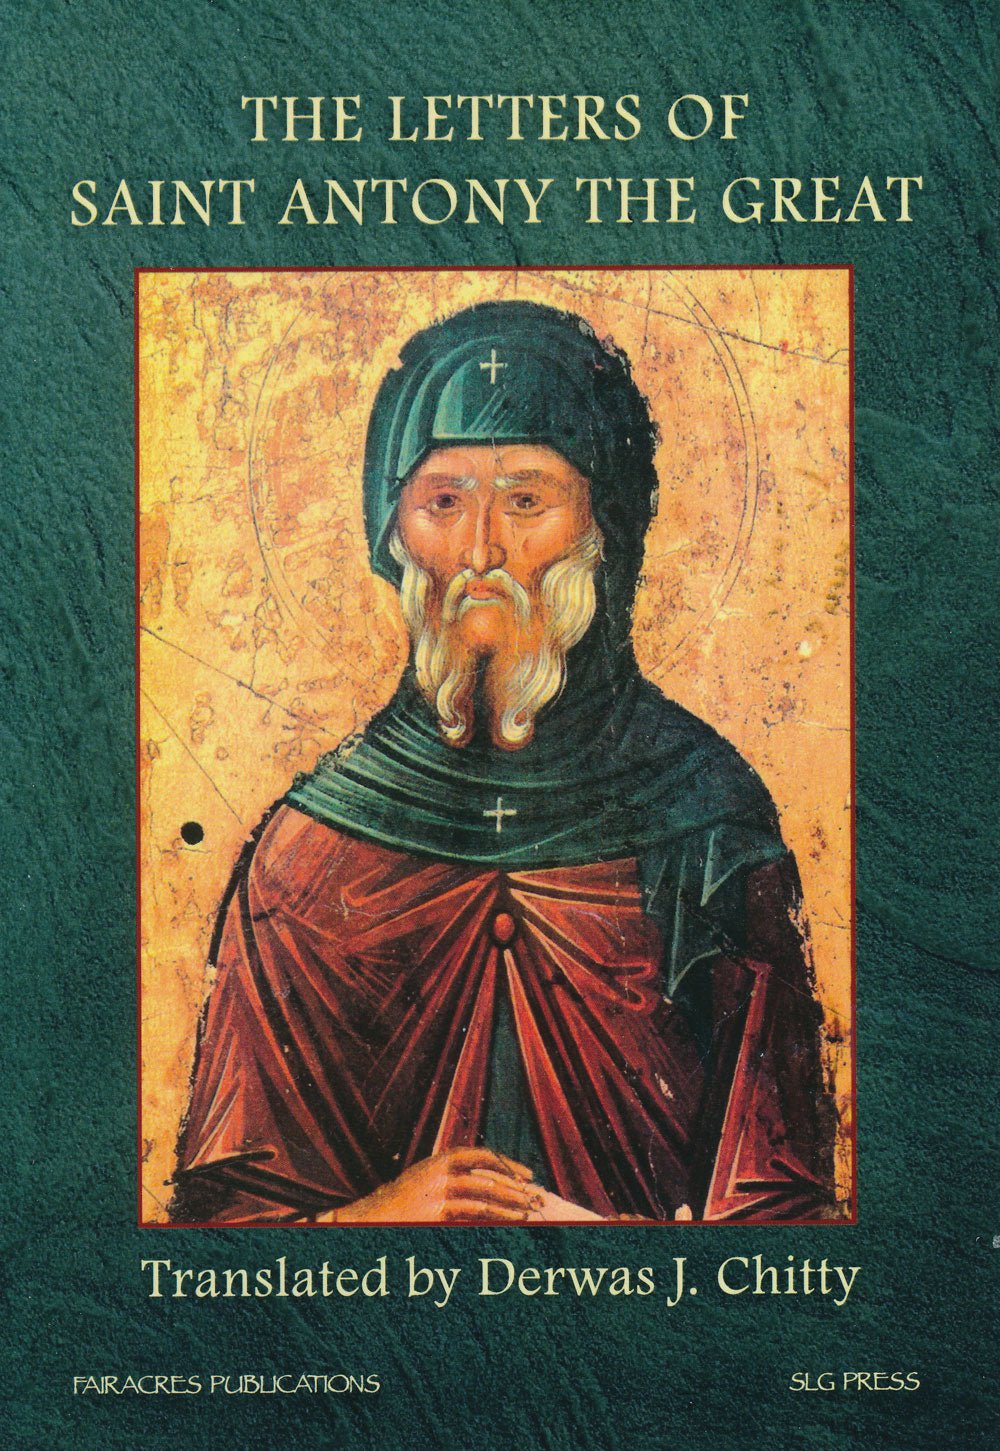 The Letters of Saint Antony the Great - Holy Cross Monastery